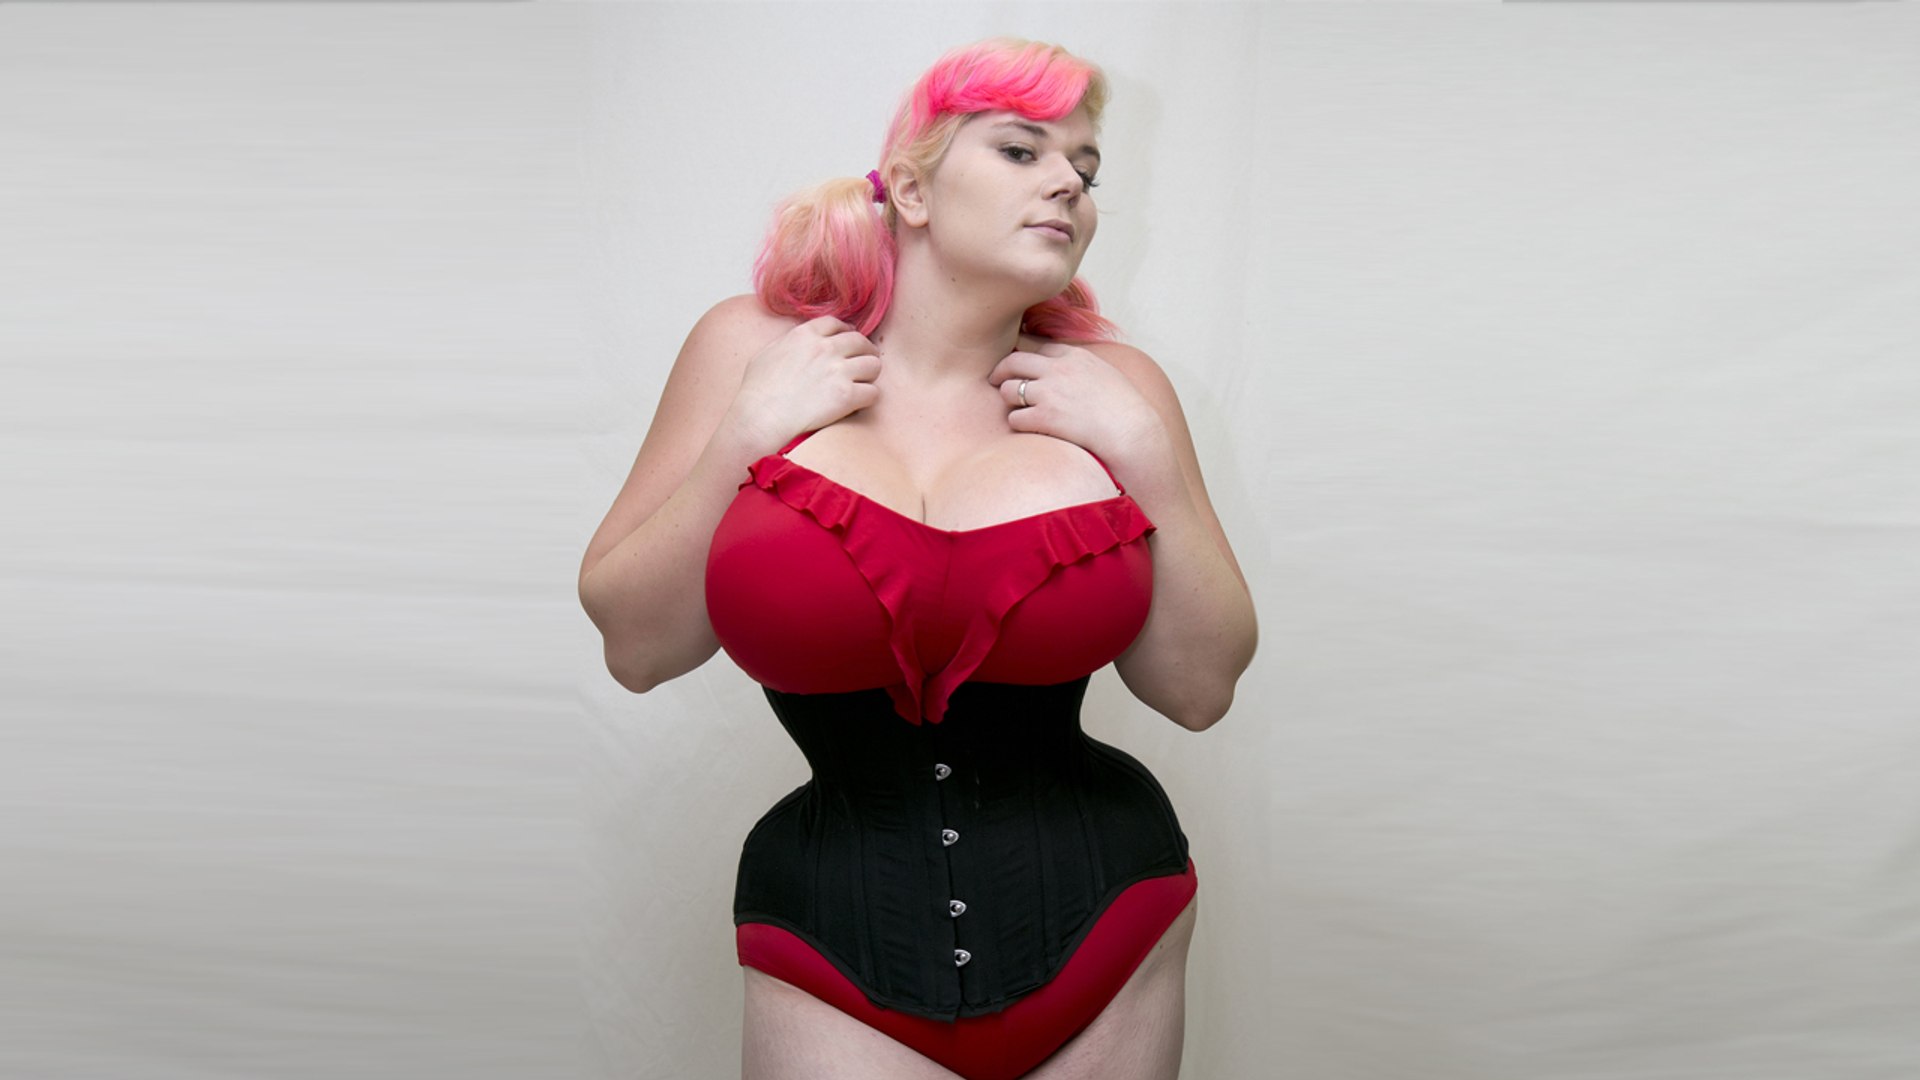 Corset Enthusiast Shrinks Her Waist To An Extreme 16 Inches - video  Dailymotion